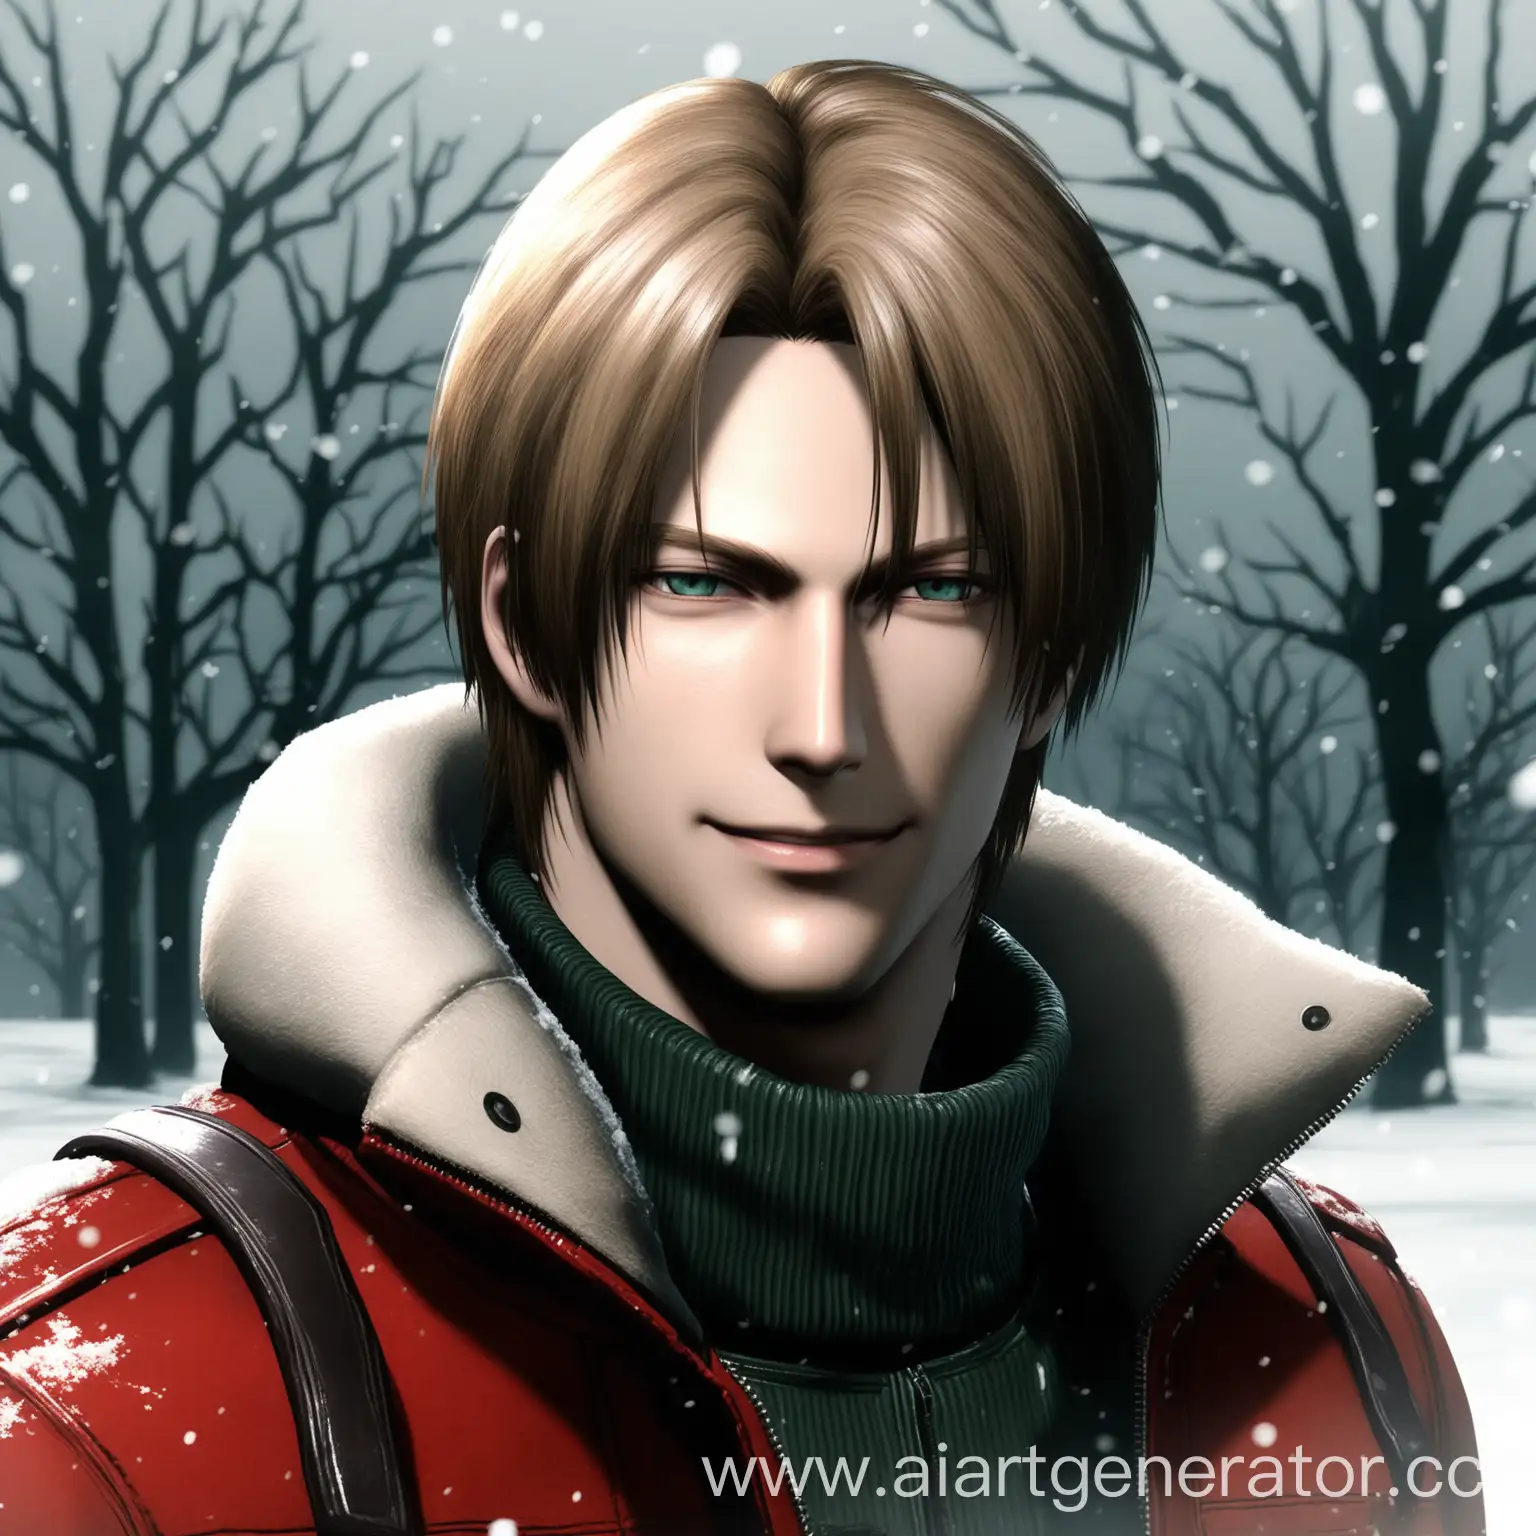 Leon Scott Kennedy is looking right at us, smiling softly, it's winter everywhere, his face is a little red from the cold, he's wearing a jacket